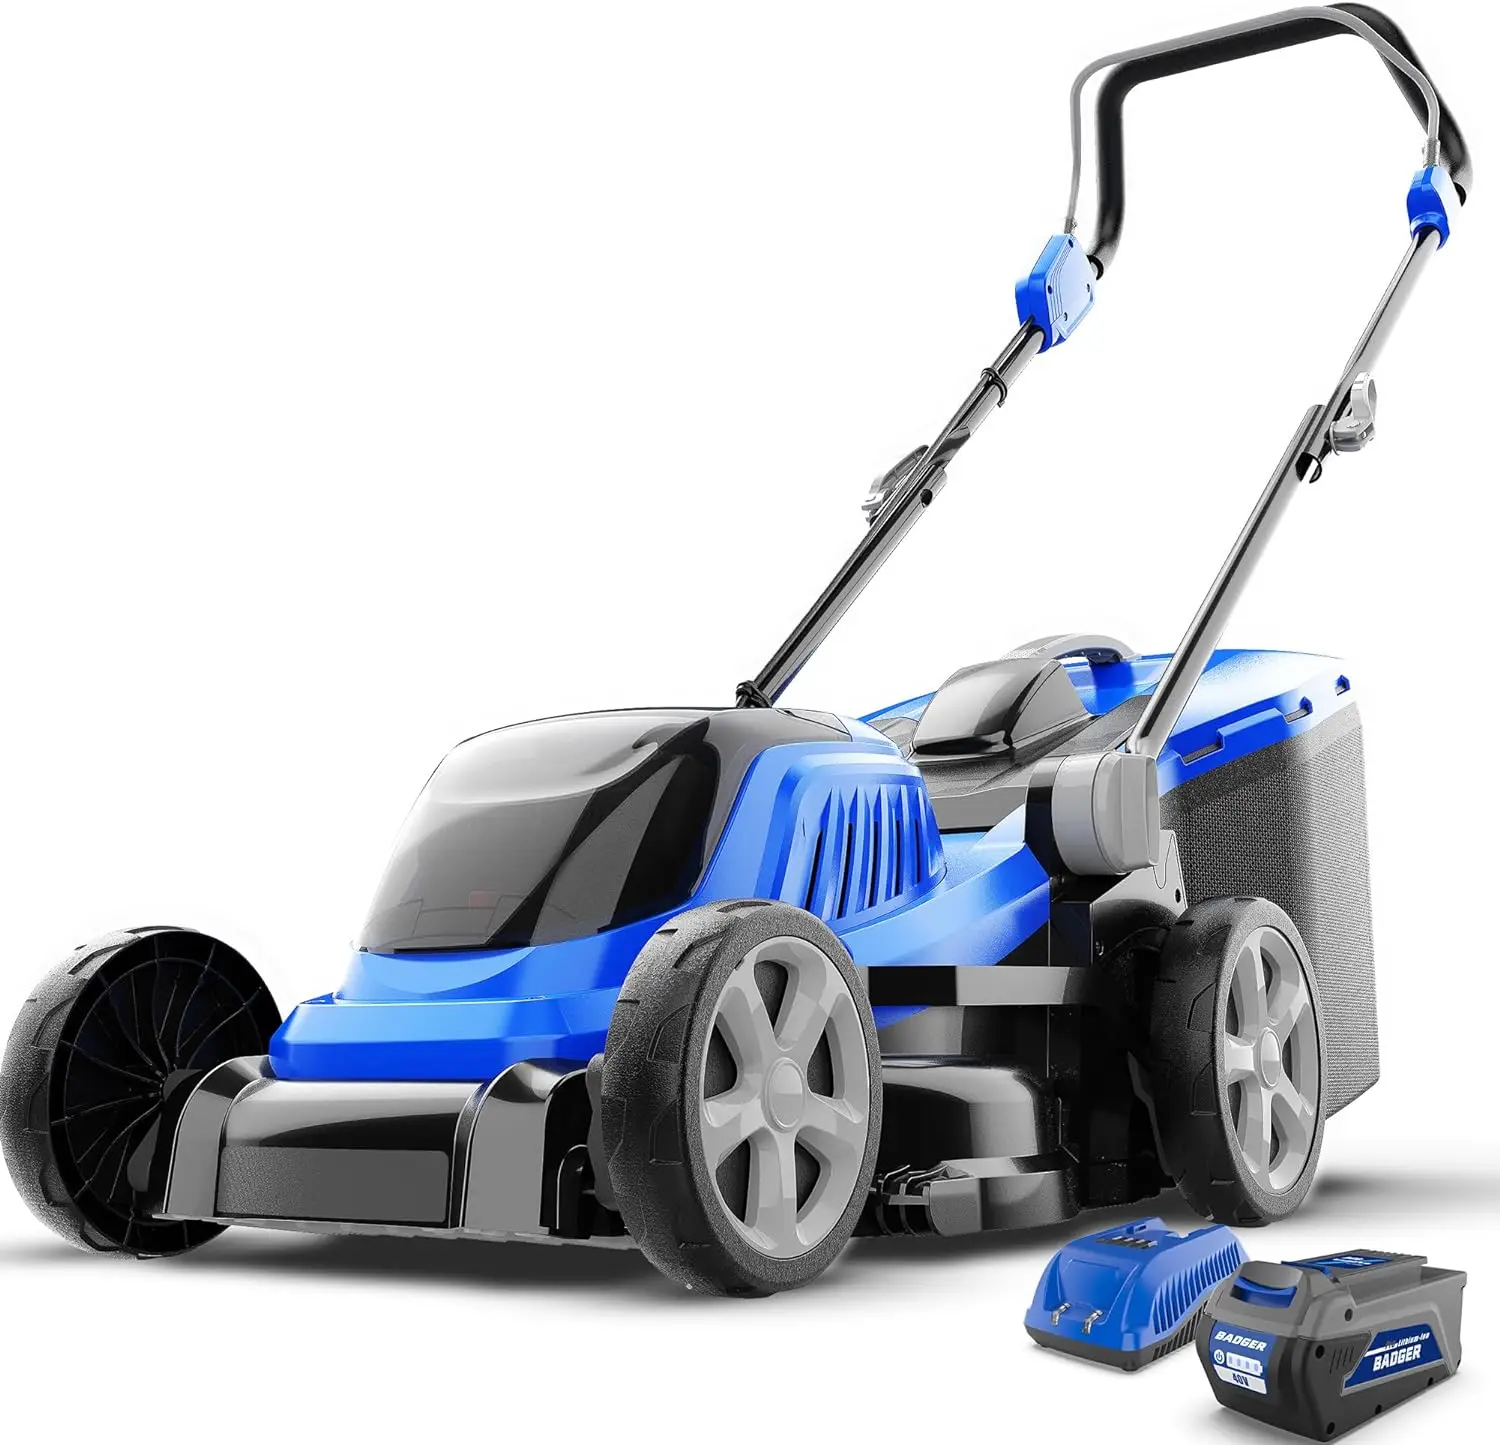 

Lawn Mower 40V Brushless 18" Cordless,5 Cutting Height Adjustments Electric Lawn Mower, Quickly Folding Within 5’s 4.0AH Battery